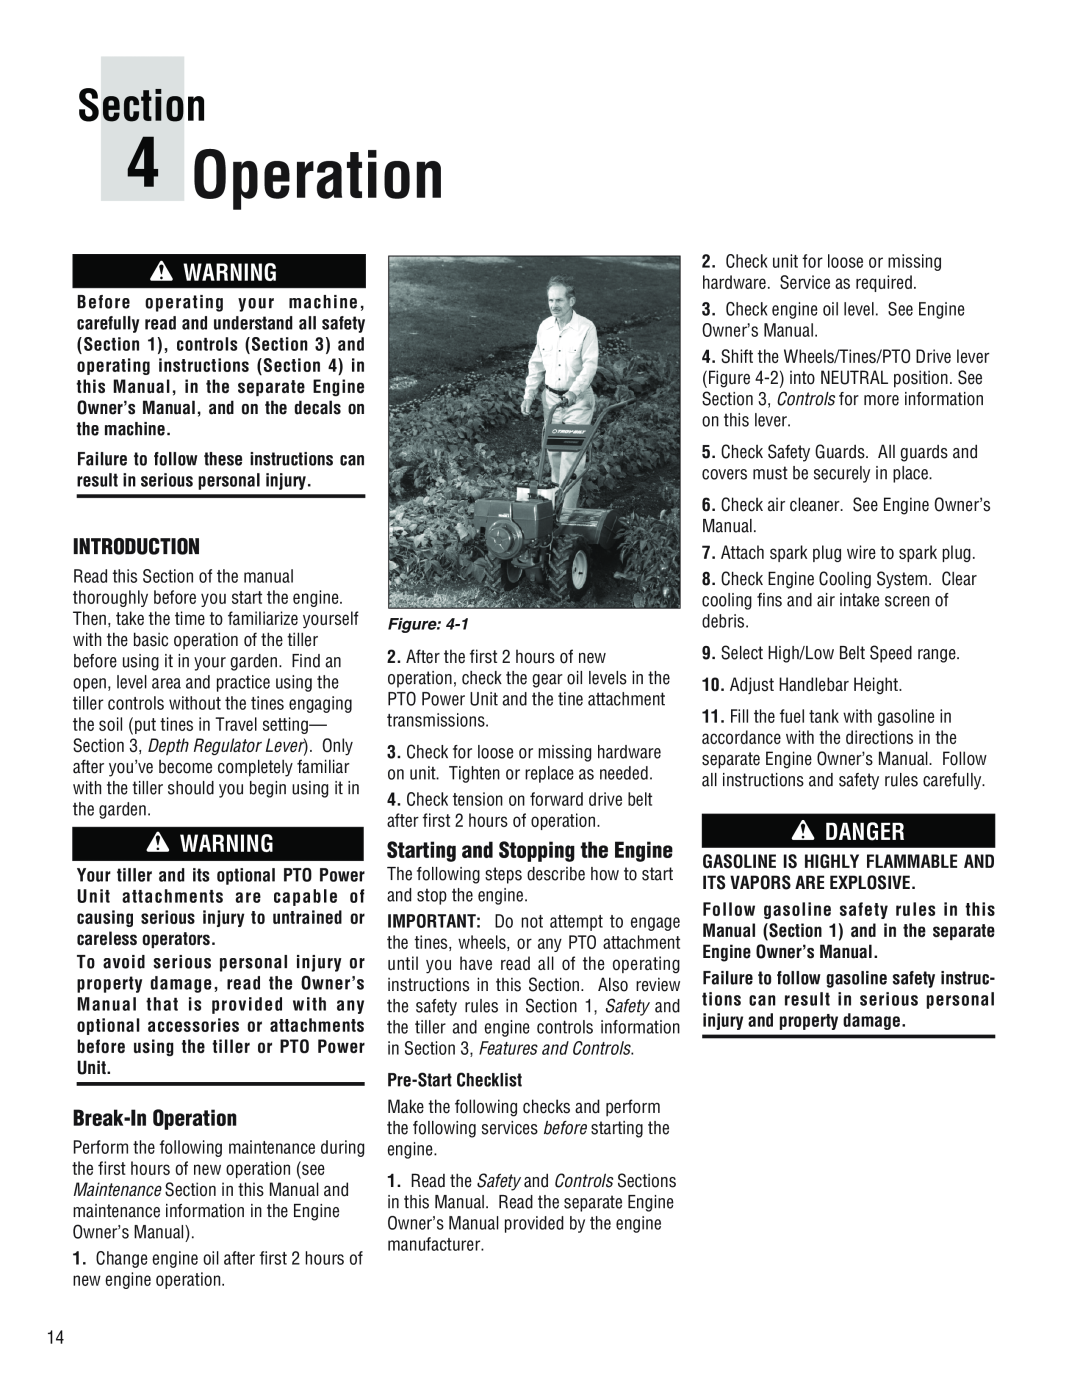 Troy-Bilt E686N manual Introduction, Break-In Operation, Starting and Stopping the Engine, Pre-Start Checklist, Section 